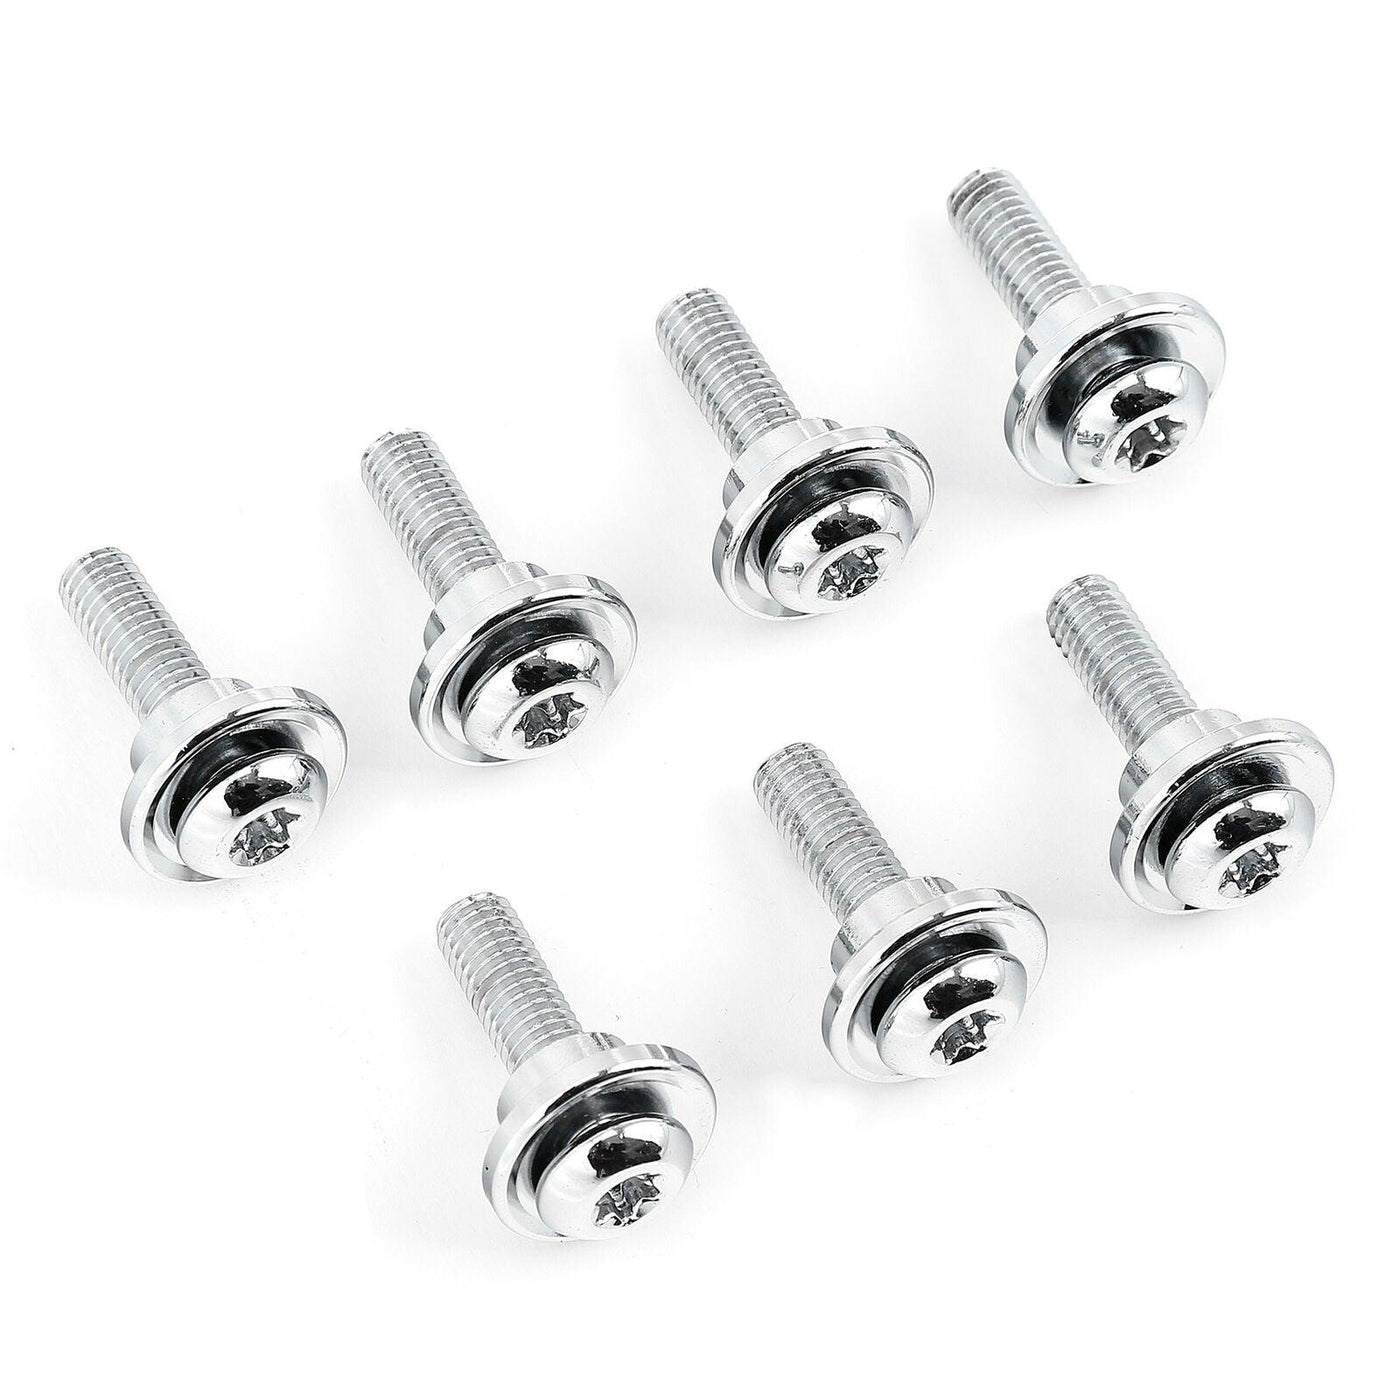 Rear Disk Brake Rotor Bolts Fit For Harley Electra Street Road Glide King 09-21 - Moto Life Products